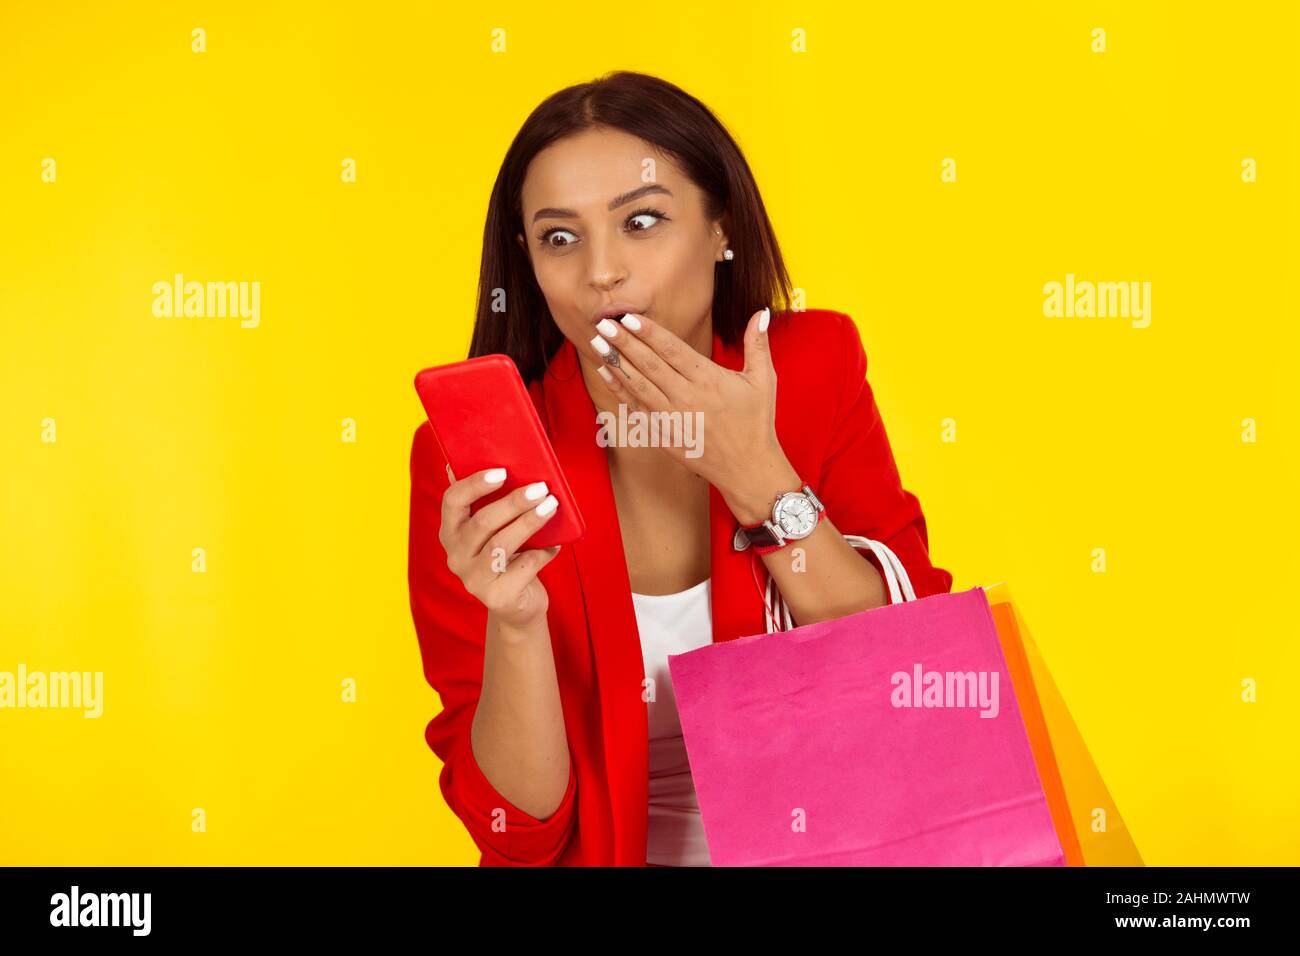 Young beautiful woman holding cellphone in hand examining it with surprised face, big eyes covering mouth with hand isolated on yellow backdrop. Great Stock Photo